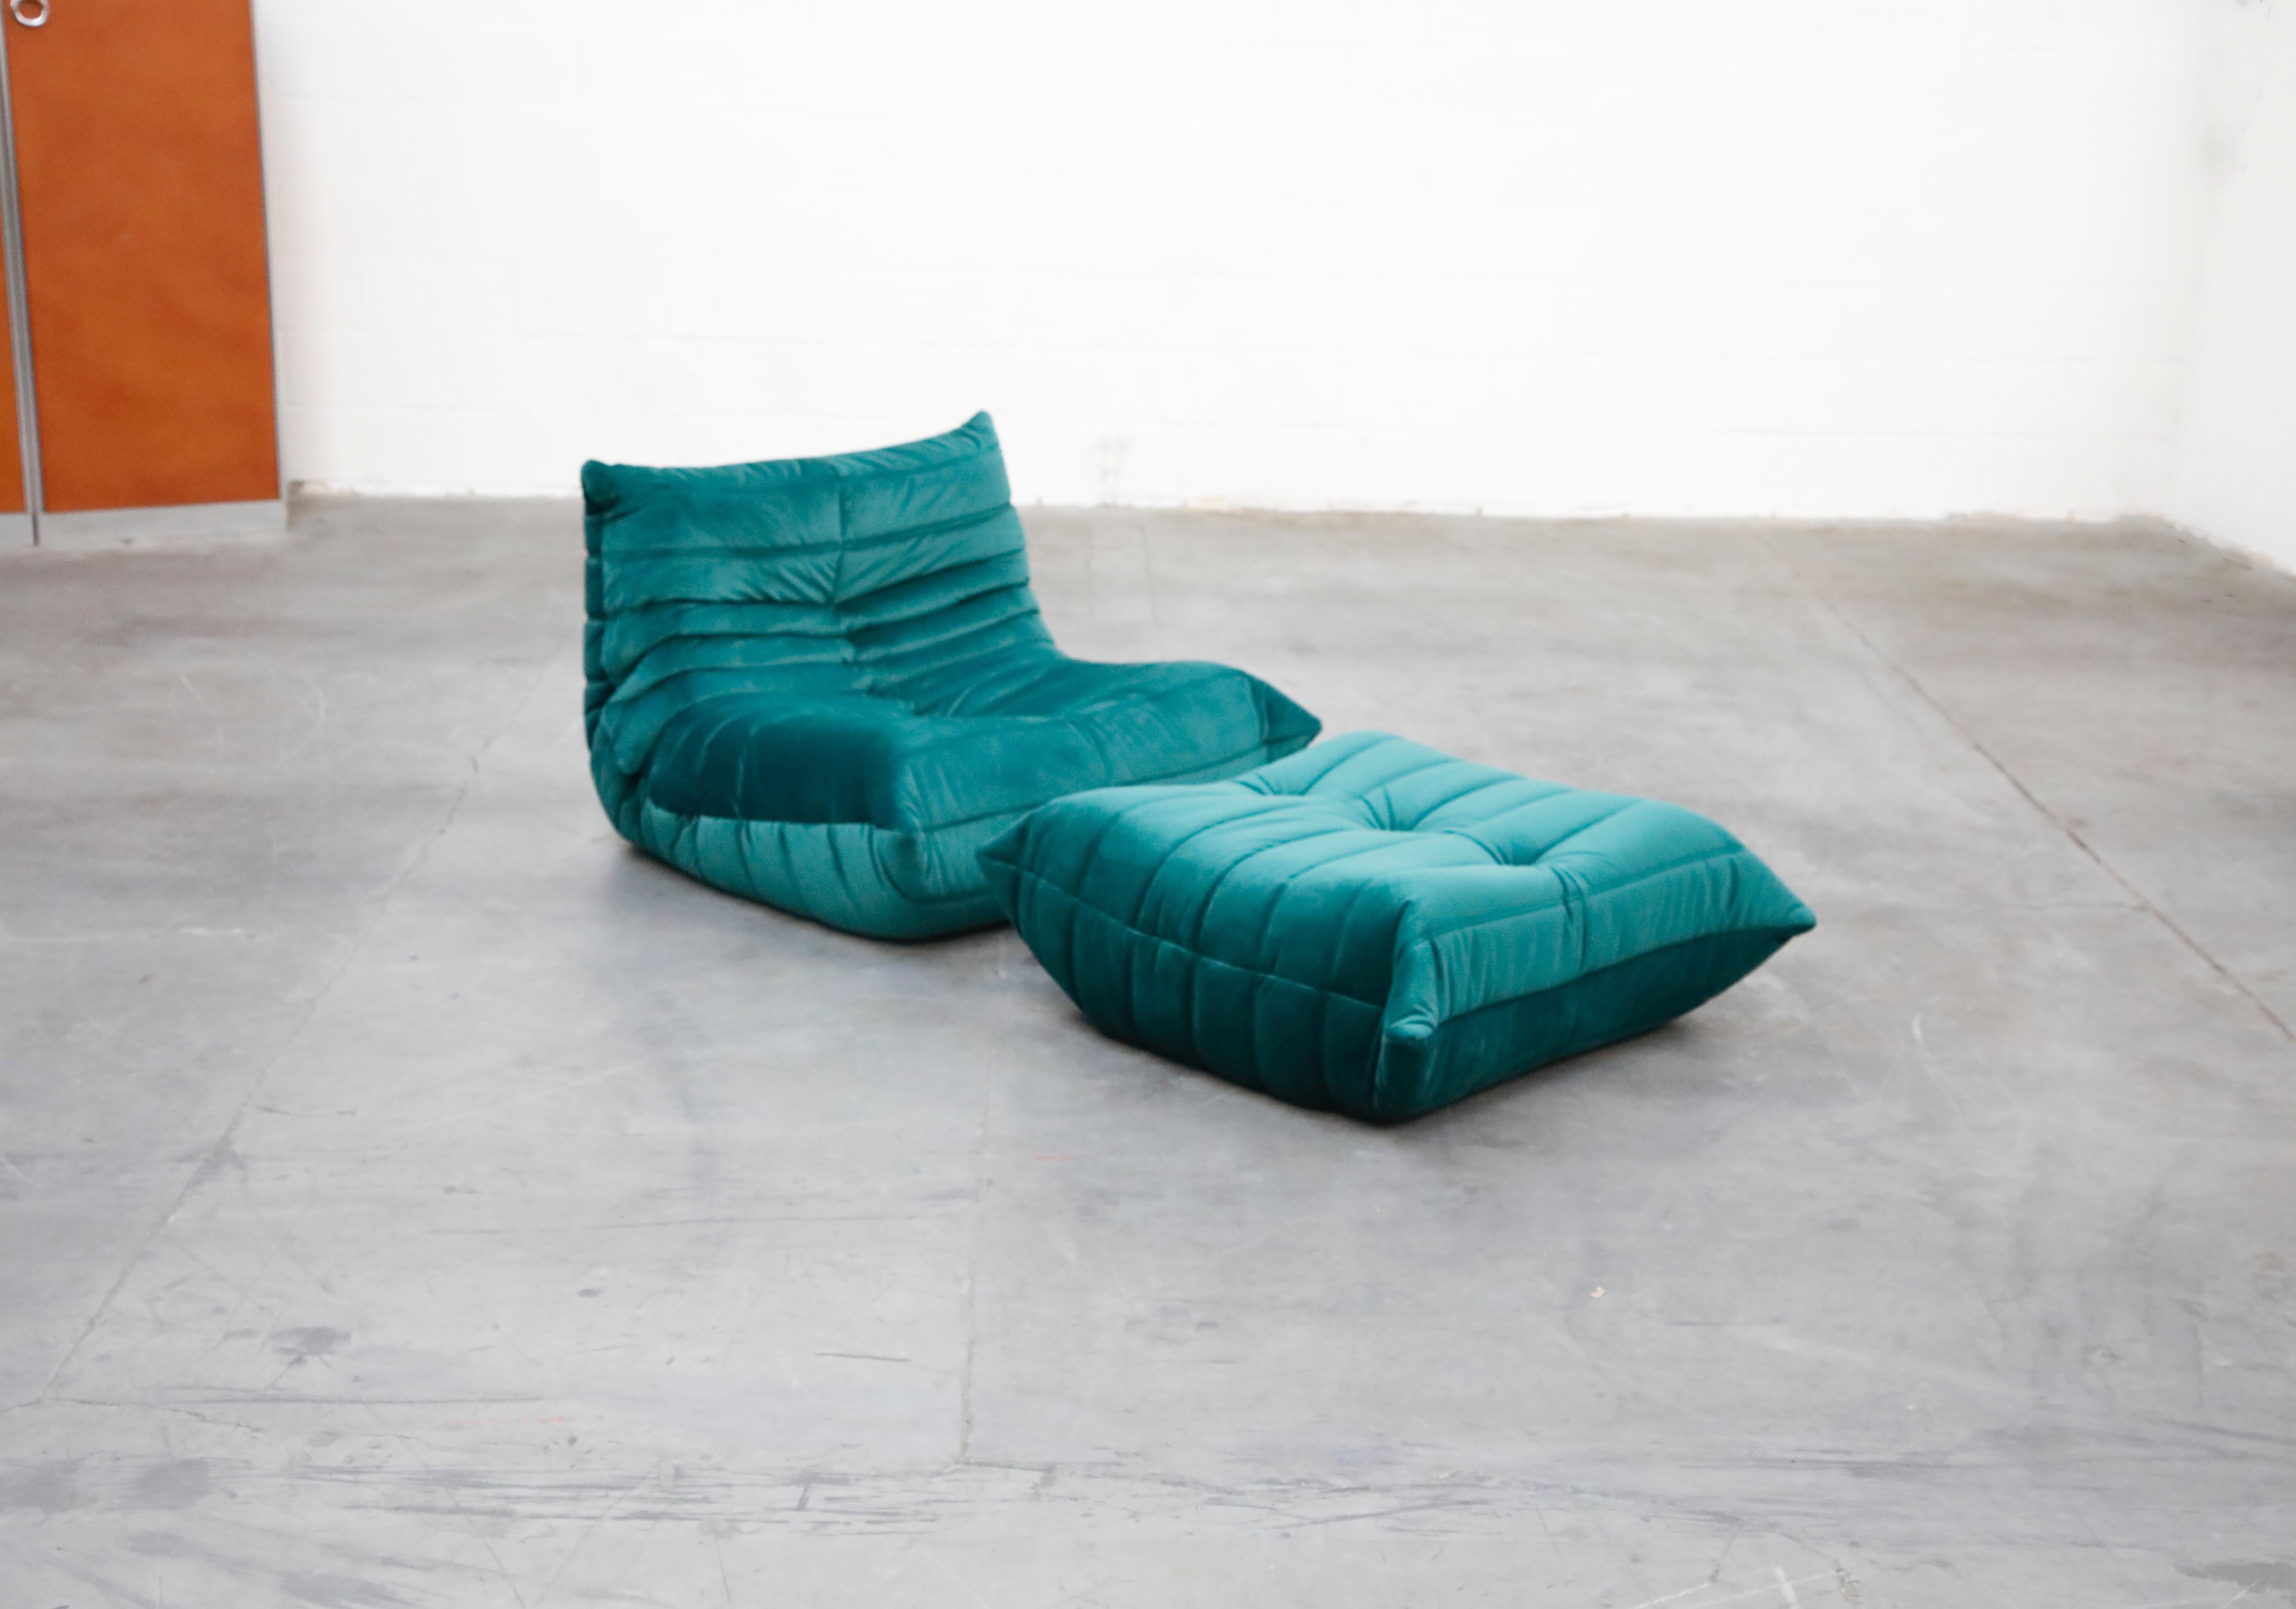 This incredible 'Togo' fireside lounge chair and ottoman was designed by Michel Ducaroy in 1973 for Ligne Roset, France. This Togo set was completely restored with new high grade velvet upholstery in a mesmerizing Emerald Green color, and bottom